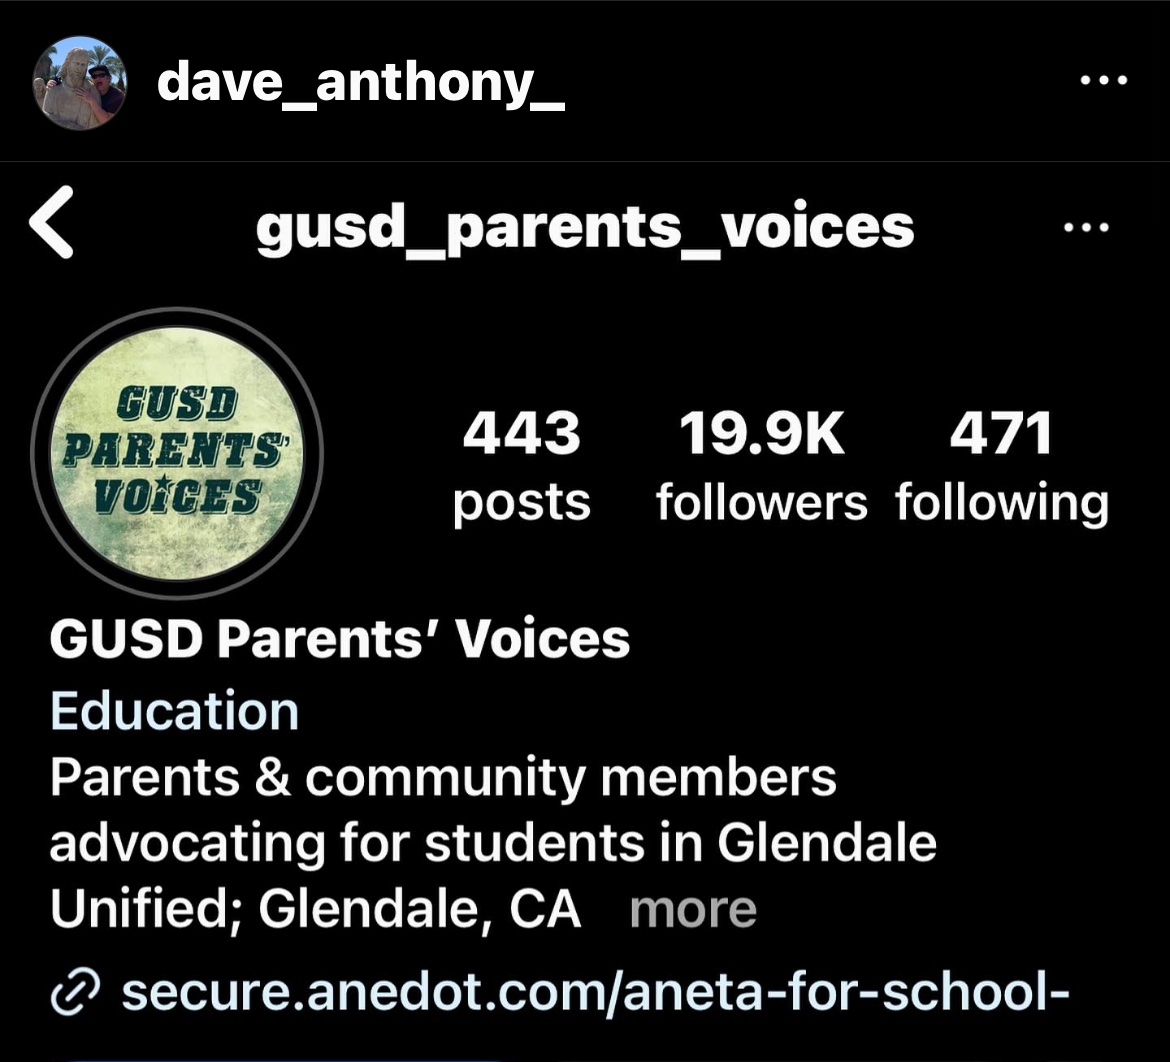 The fascists running for Dave’s school board have posted a video accusing him of vandalizing a political signs to cause harassment and threats. Please report if you have an insta account